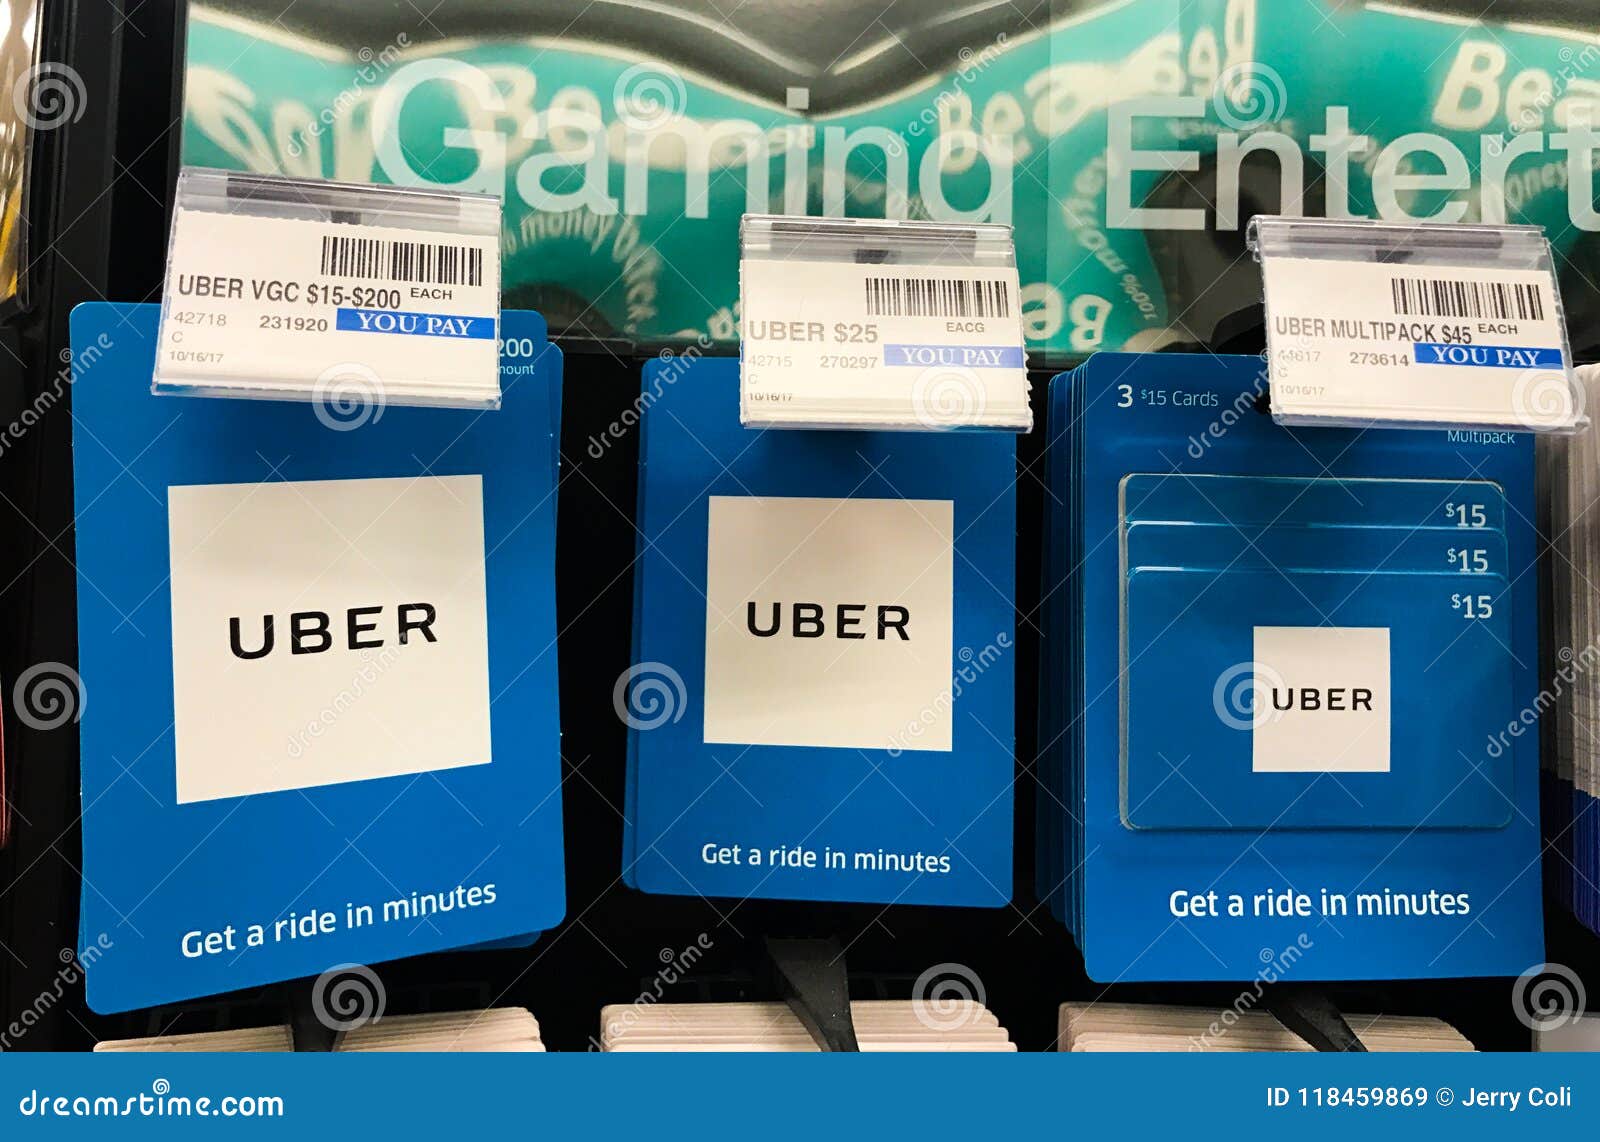 unknown Dragon beast UBER Rideshare Gift Cards at a Chain Pharmacy Store Editorial Stock Image -  Image of chain, rides: 118459869